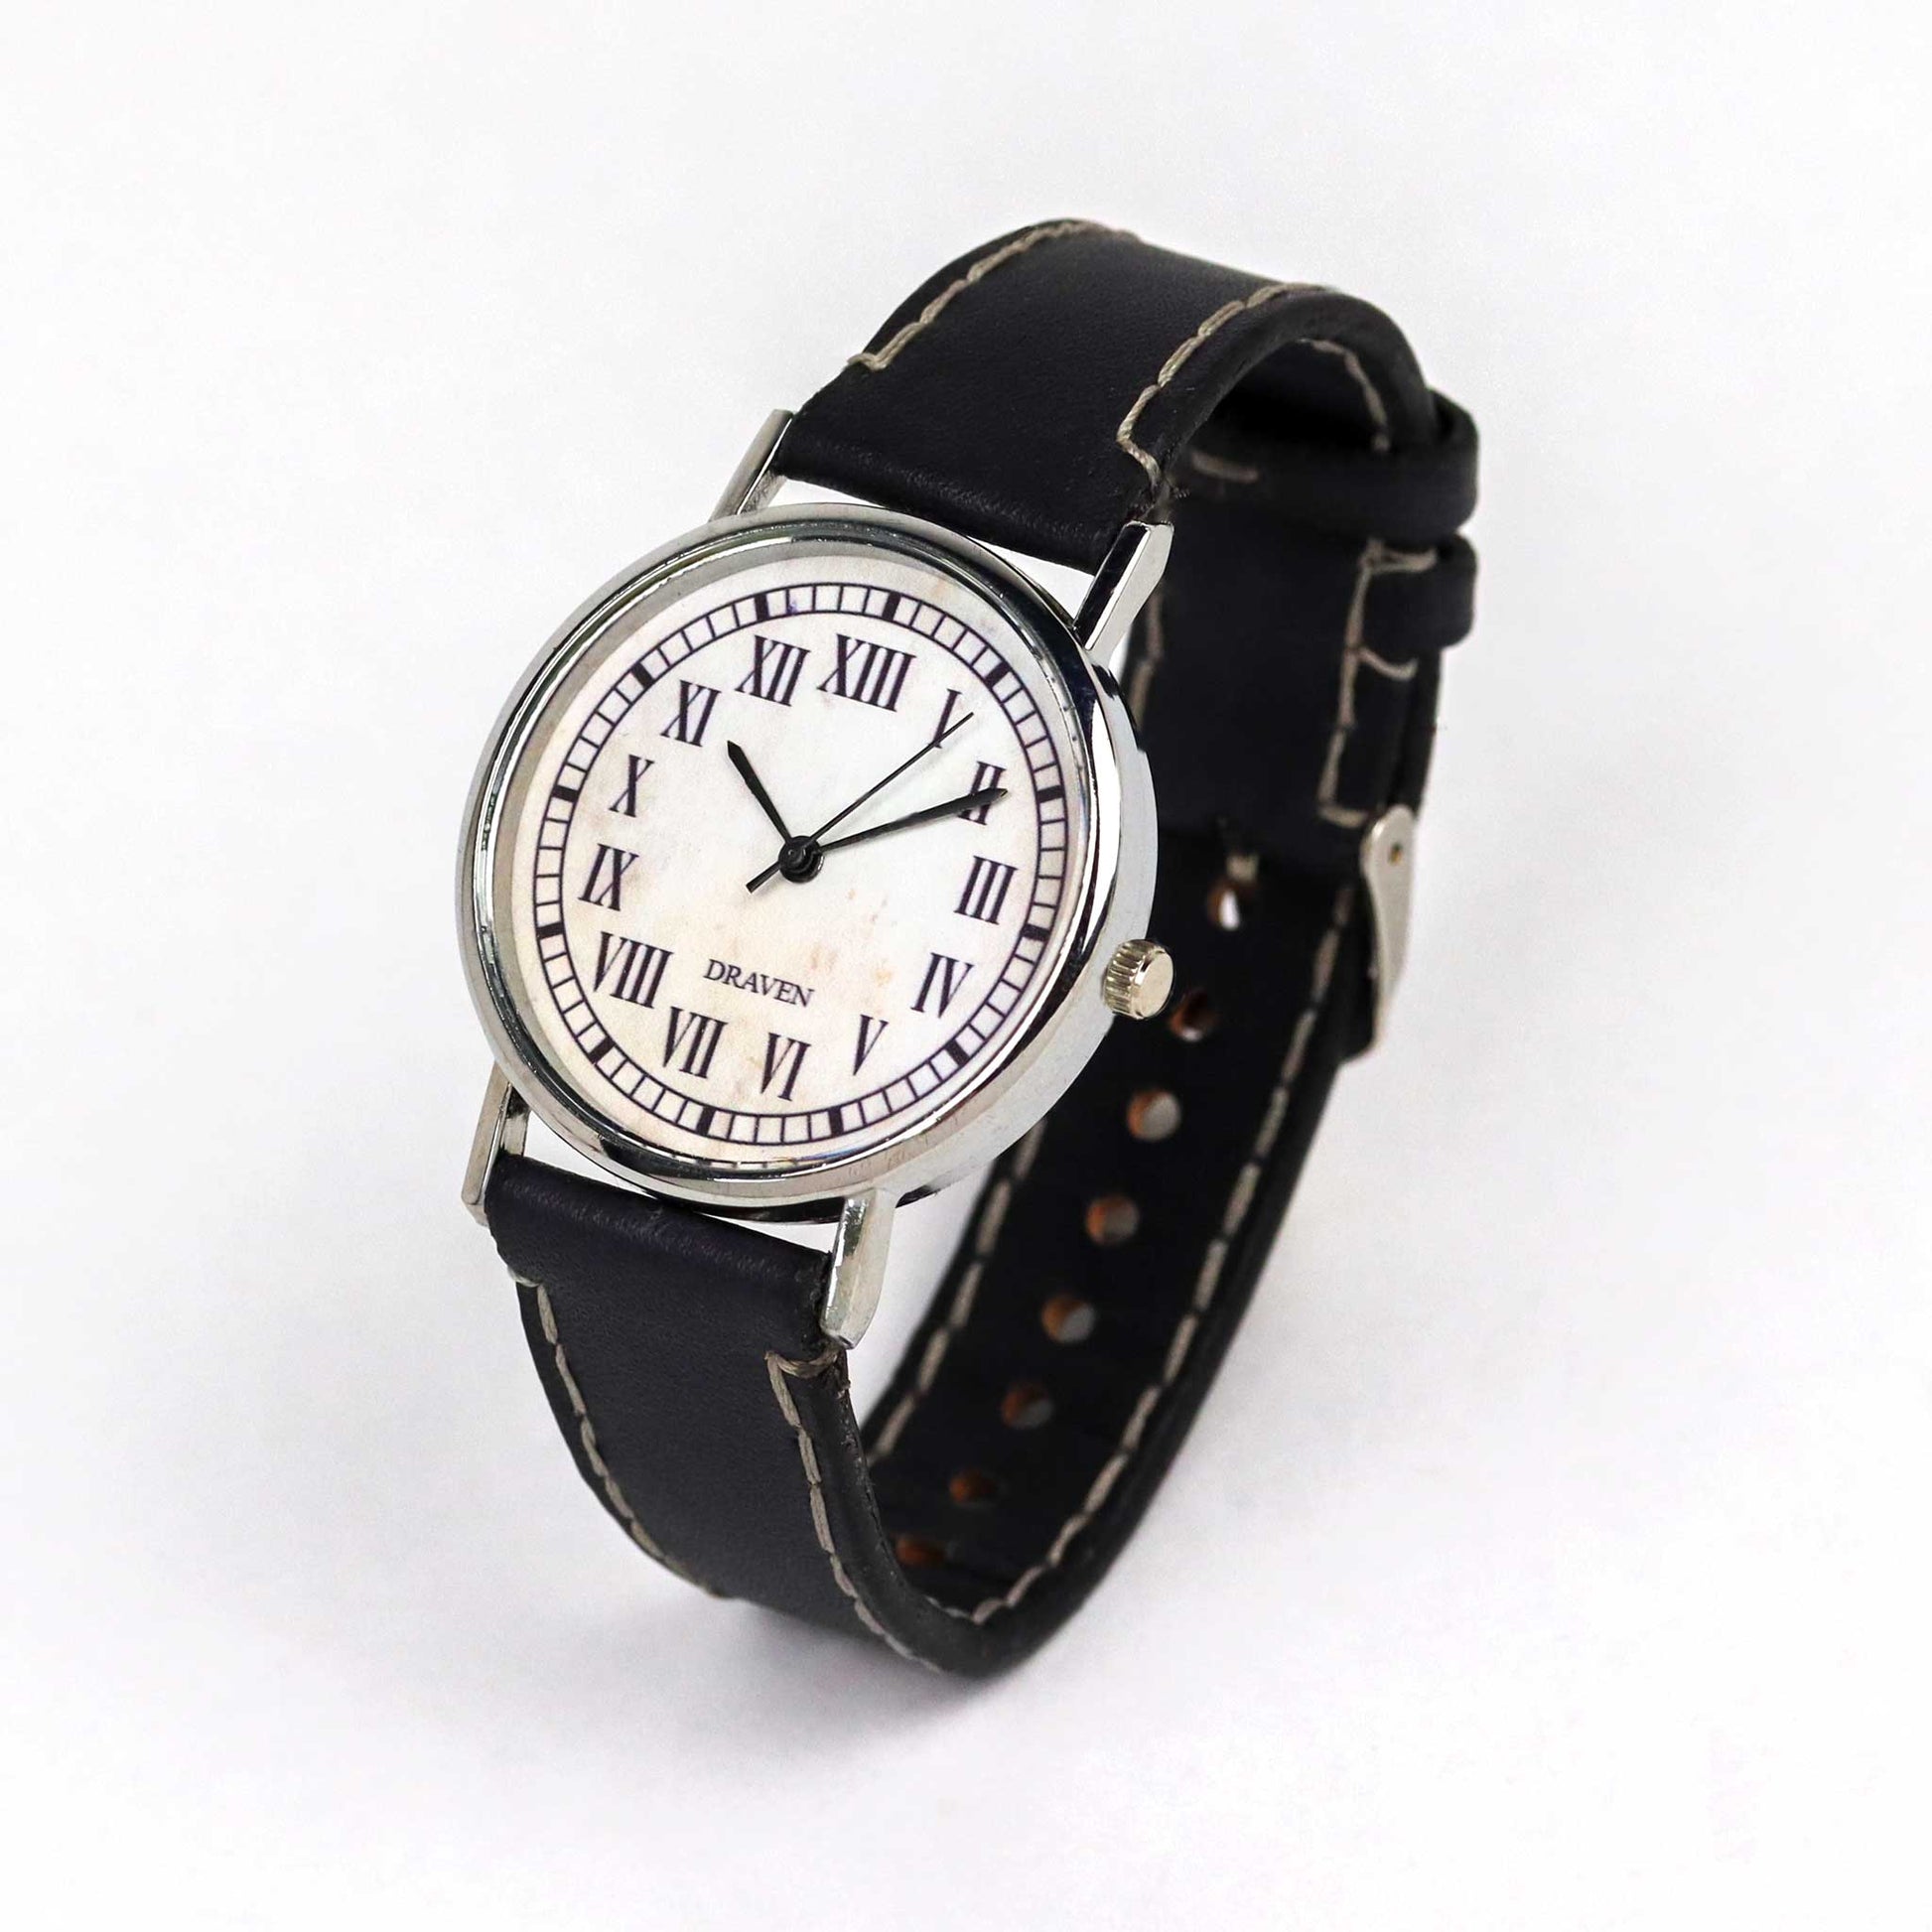 angled view of a Thirteen Hour Wrist Watch with a black strap